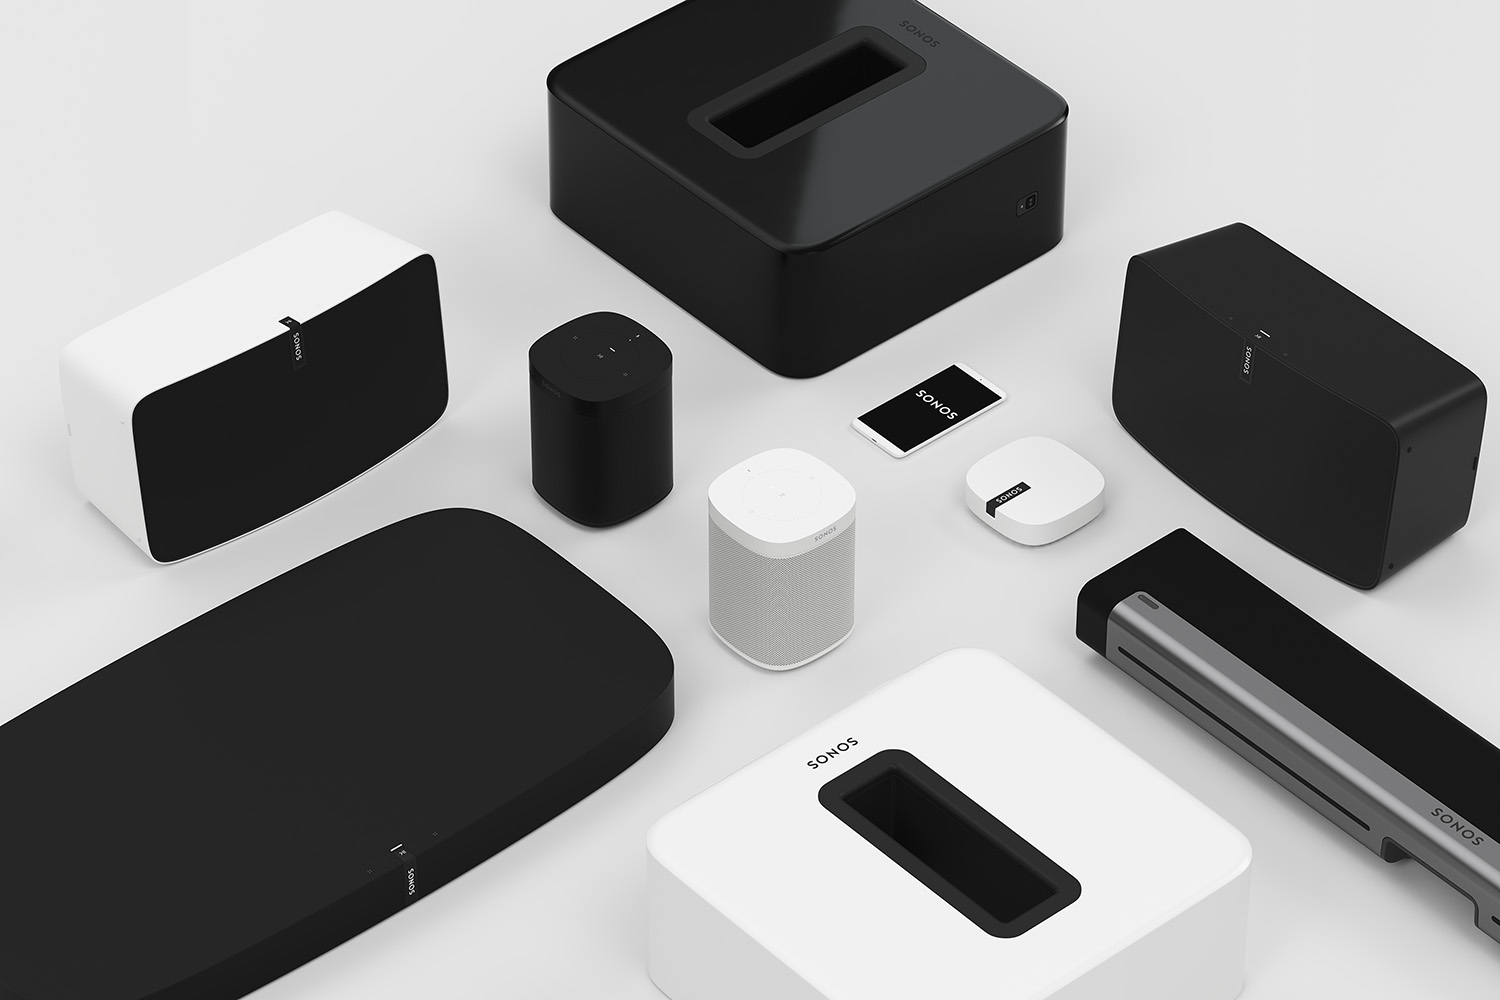 Sonos devices will be easier to manufacture and more energy efficient